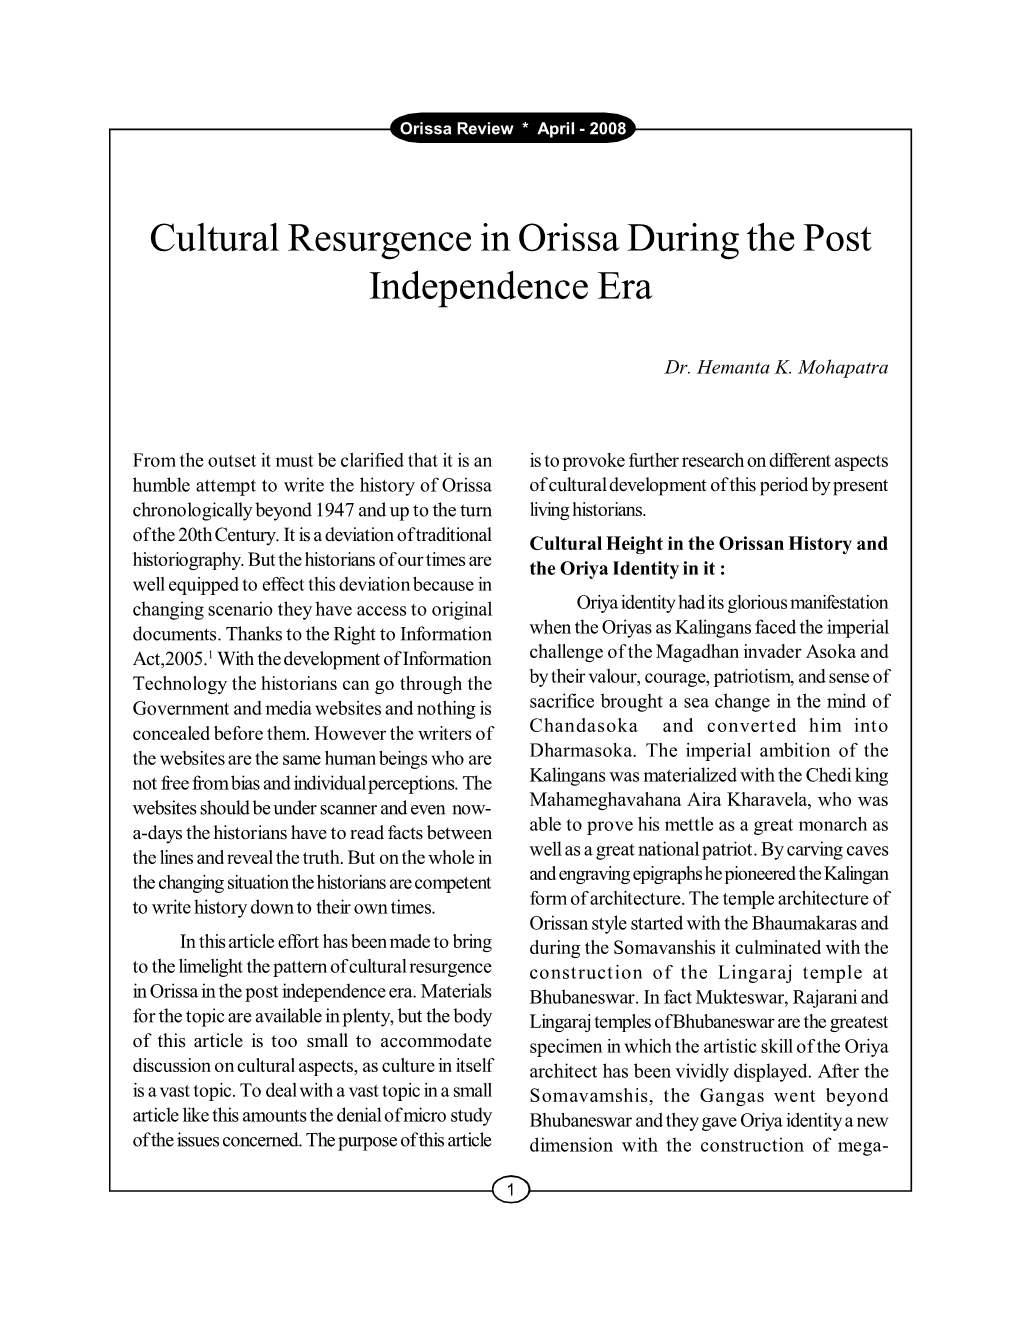 Cultural Resurgence in Orissa During the Post Independence Era